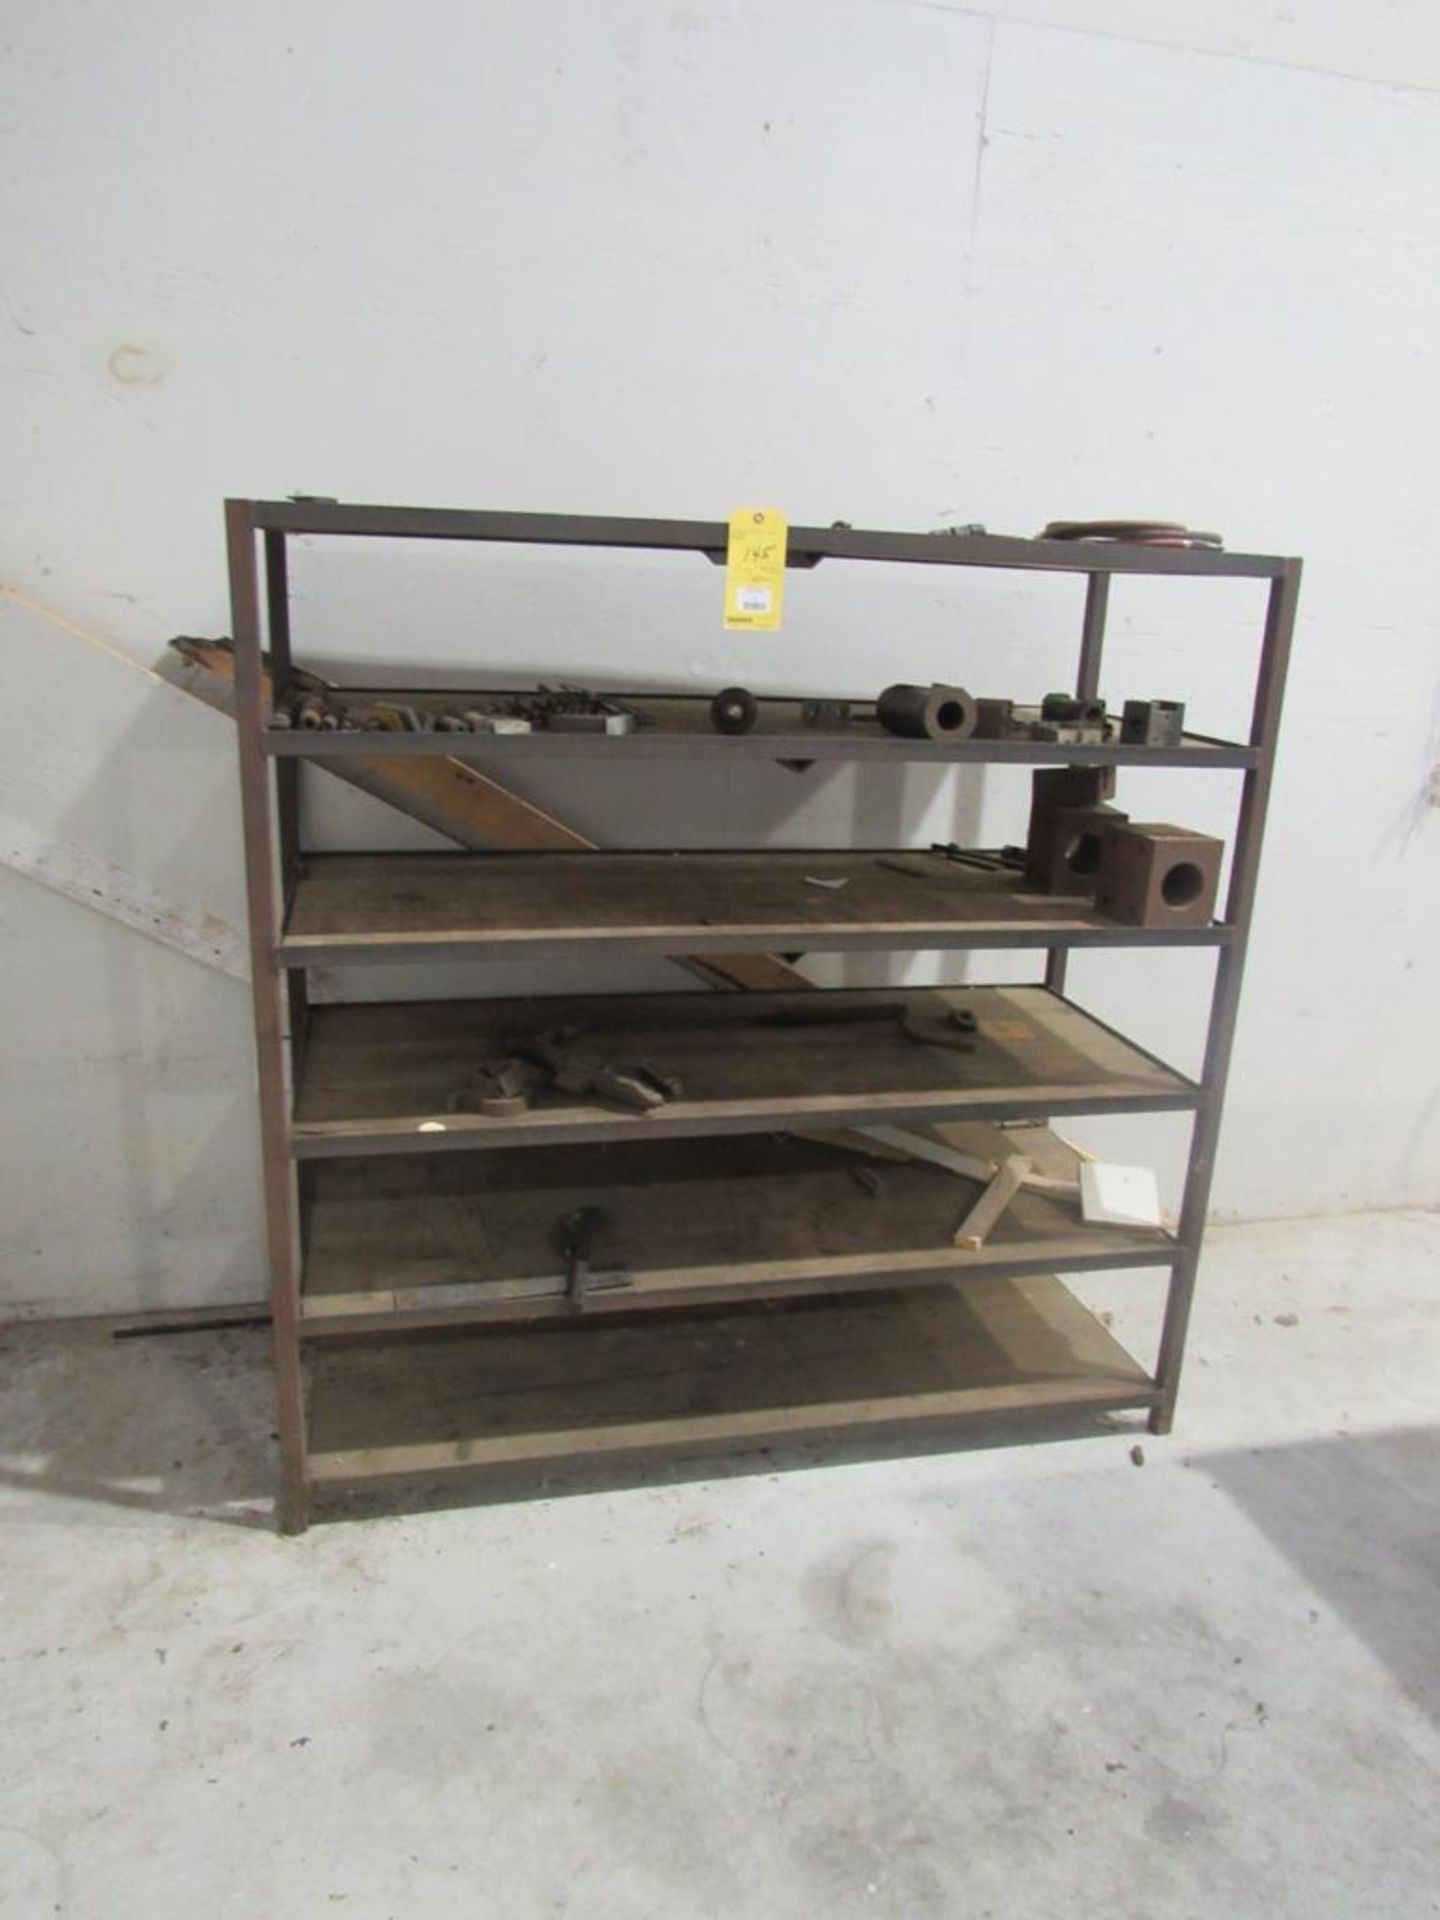 Lot: Tooling for Manual Lathes with H.D. Rack